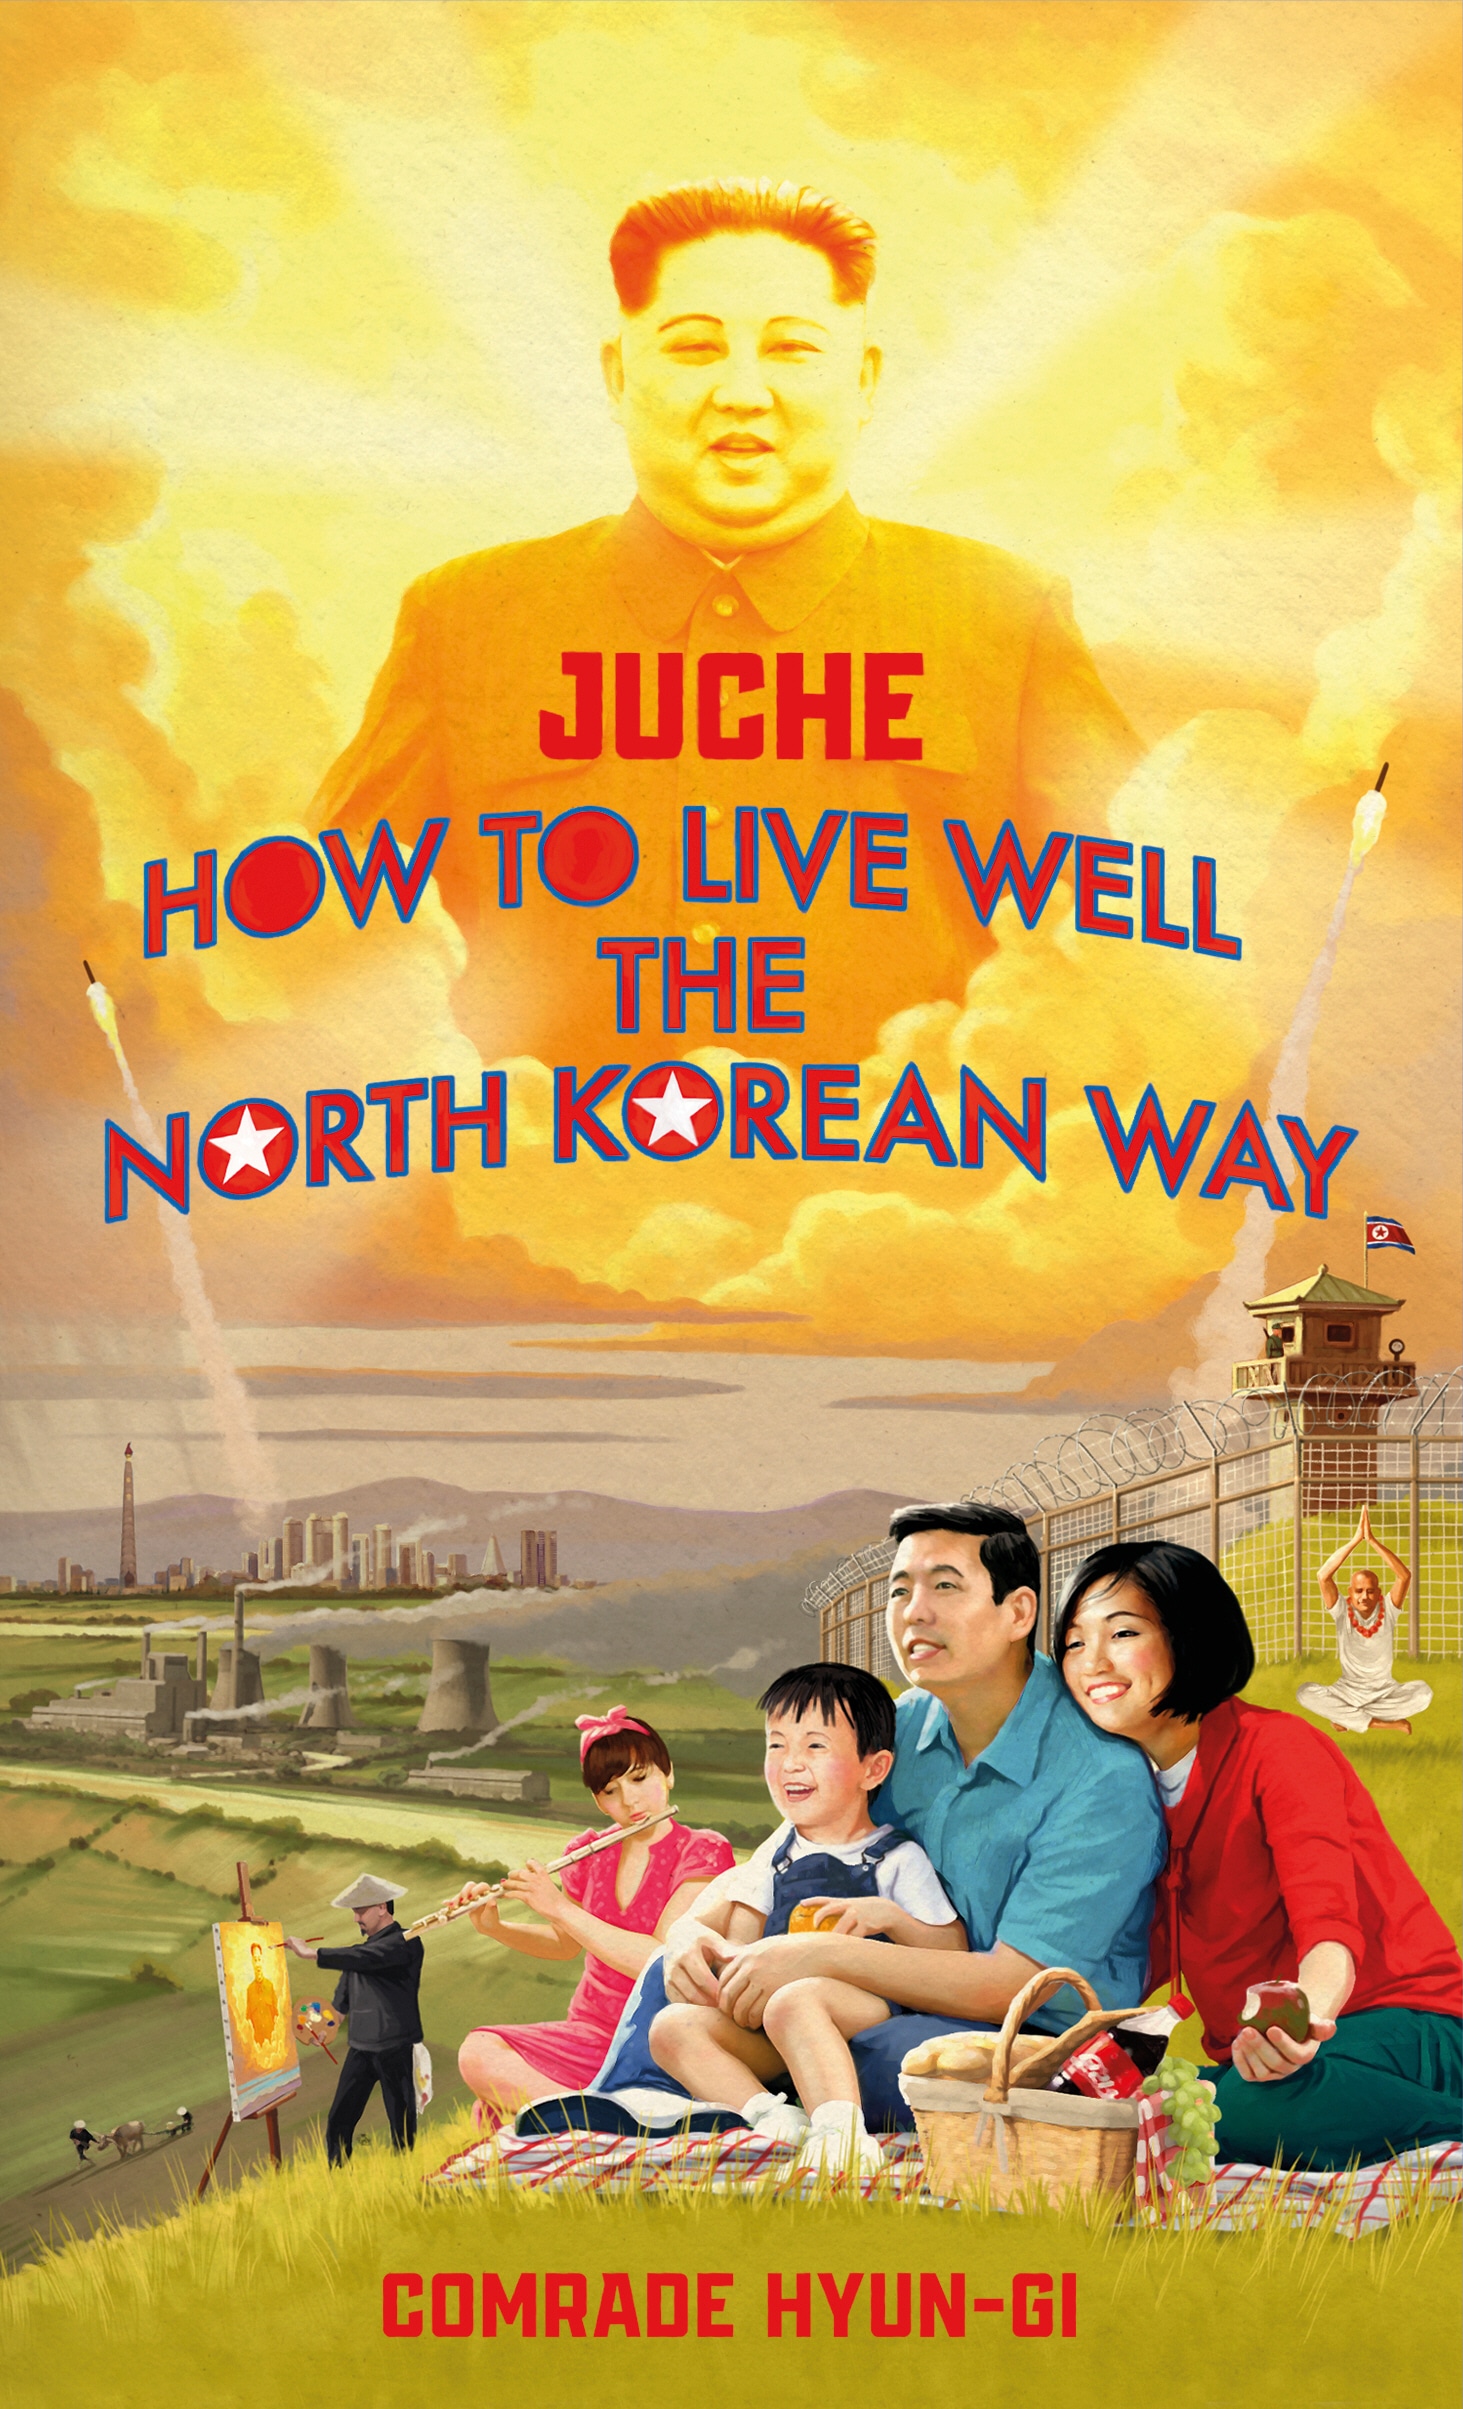 Book “Juche - How to Live Well the North Korean Way” by Oliver Grant — October 29, 2020